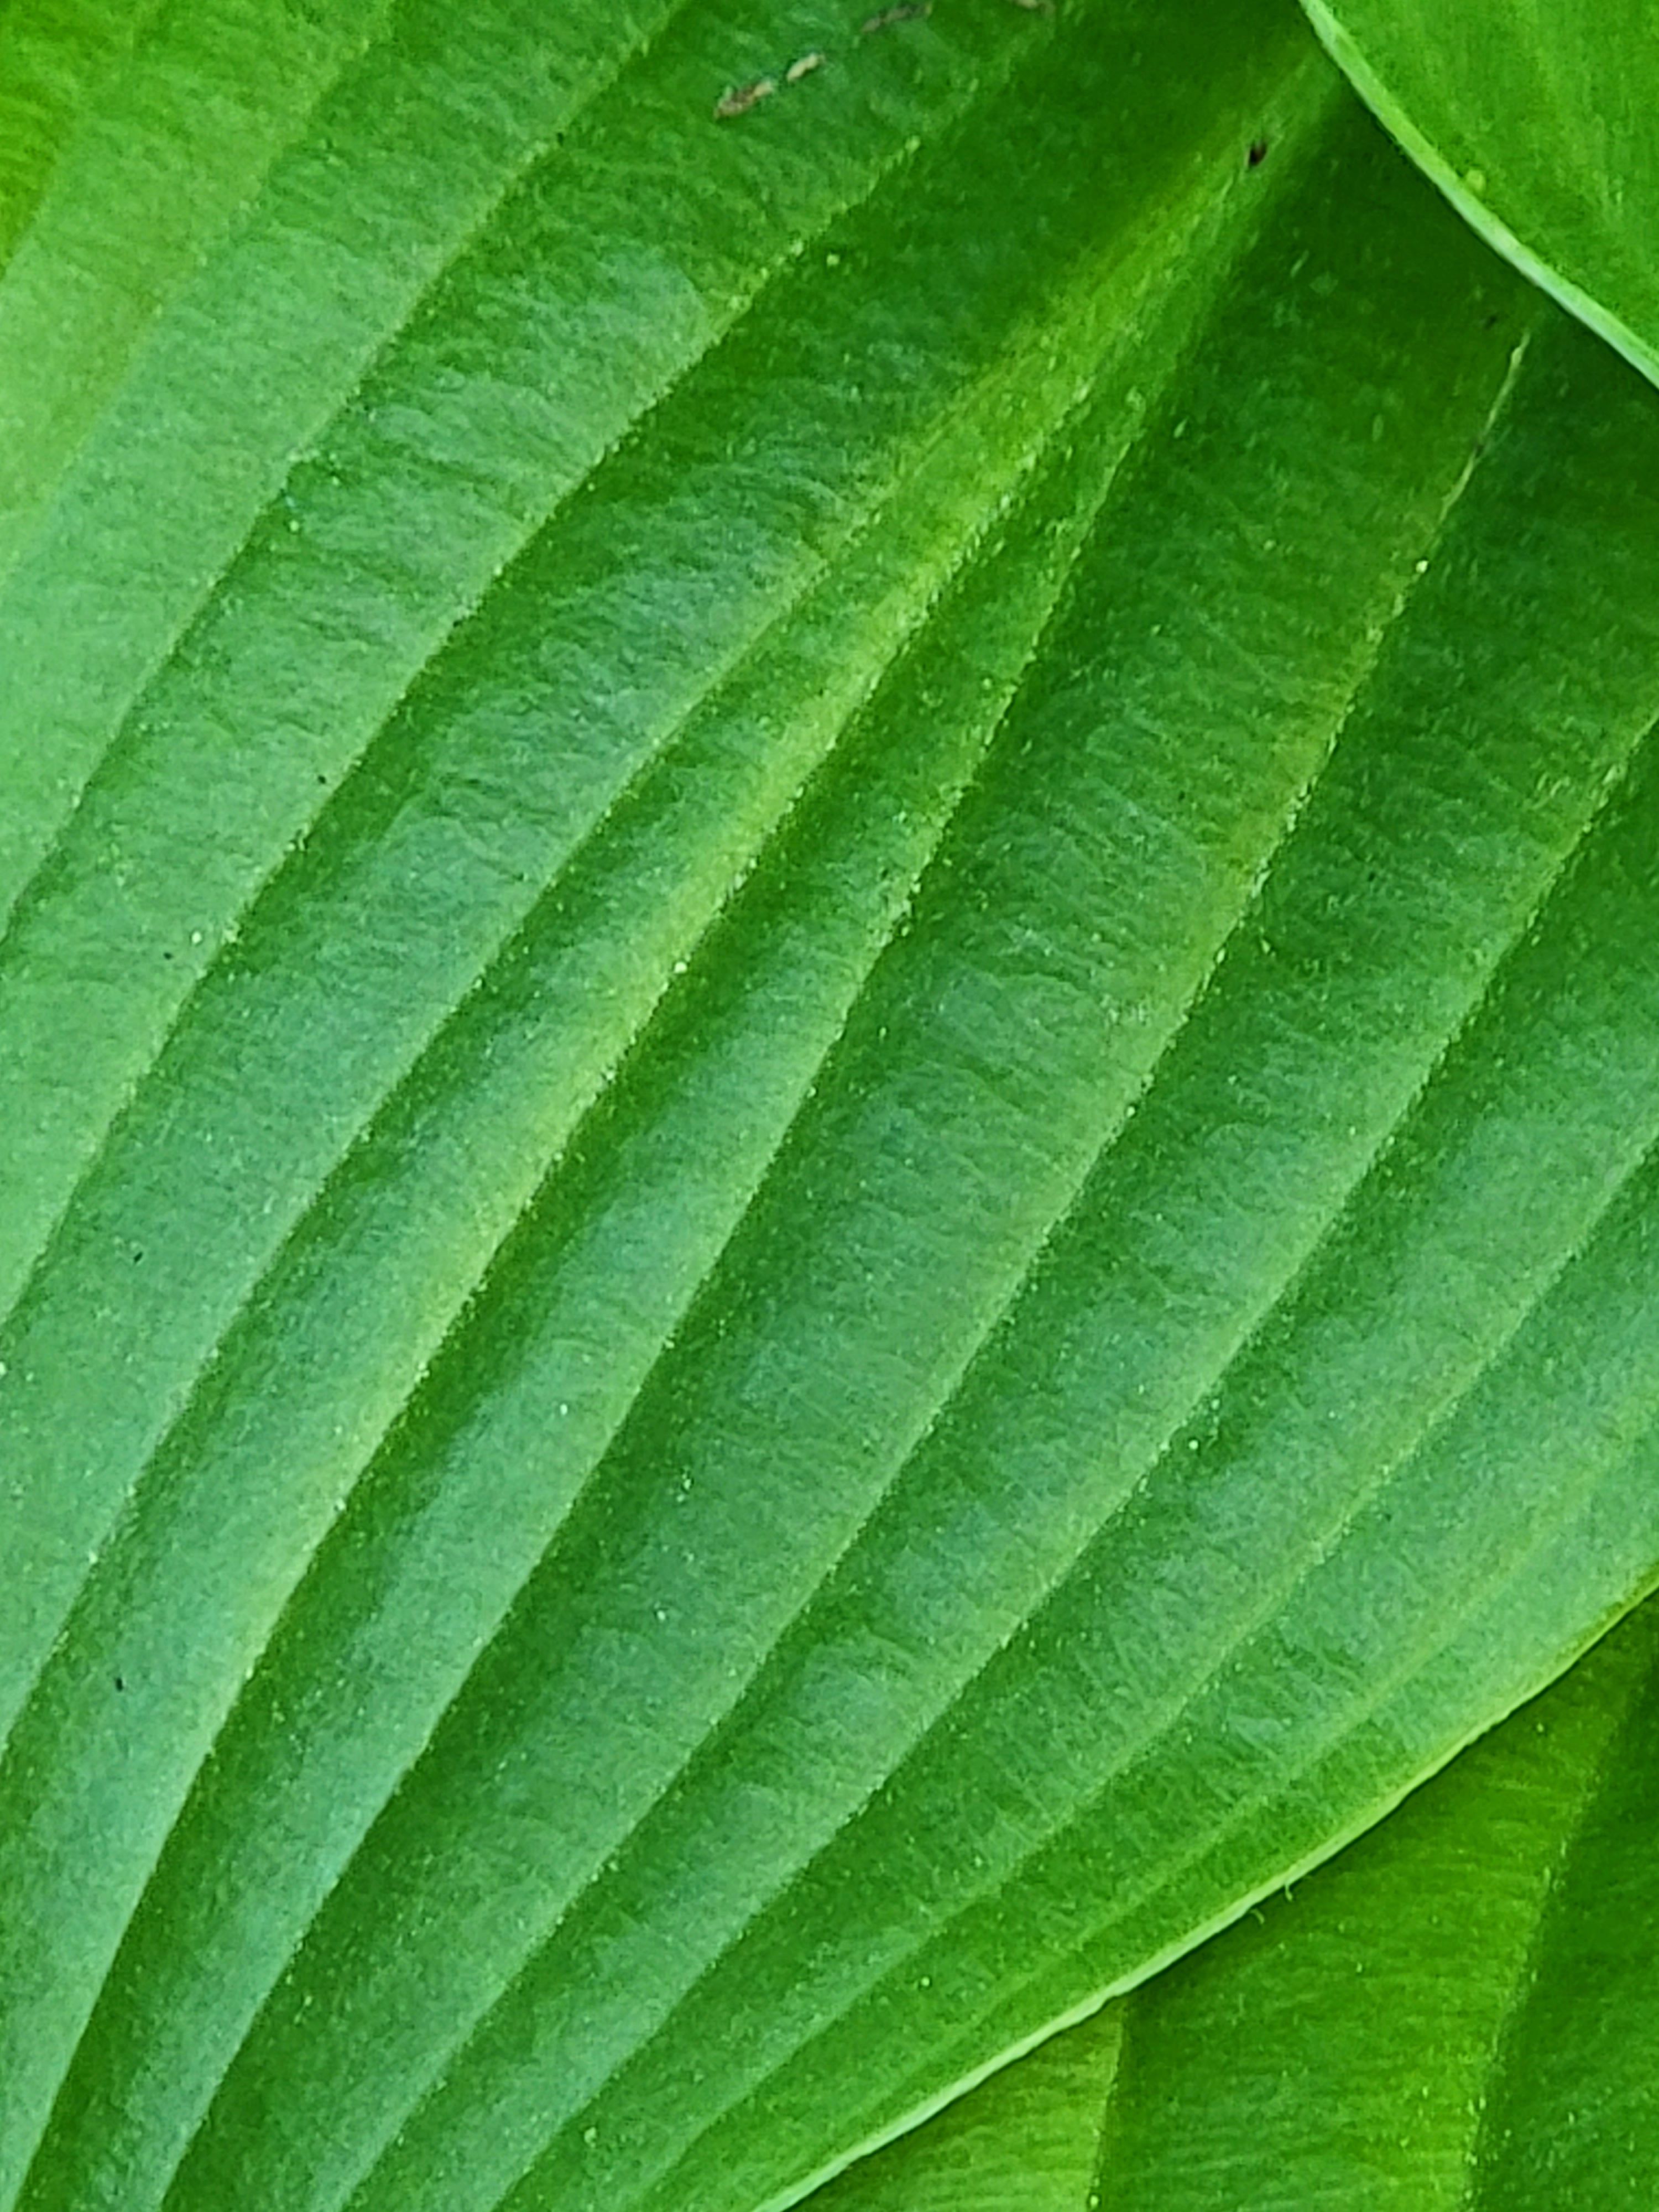 picture of a green plant using telephoto 2 lens camera